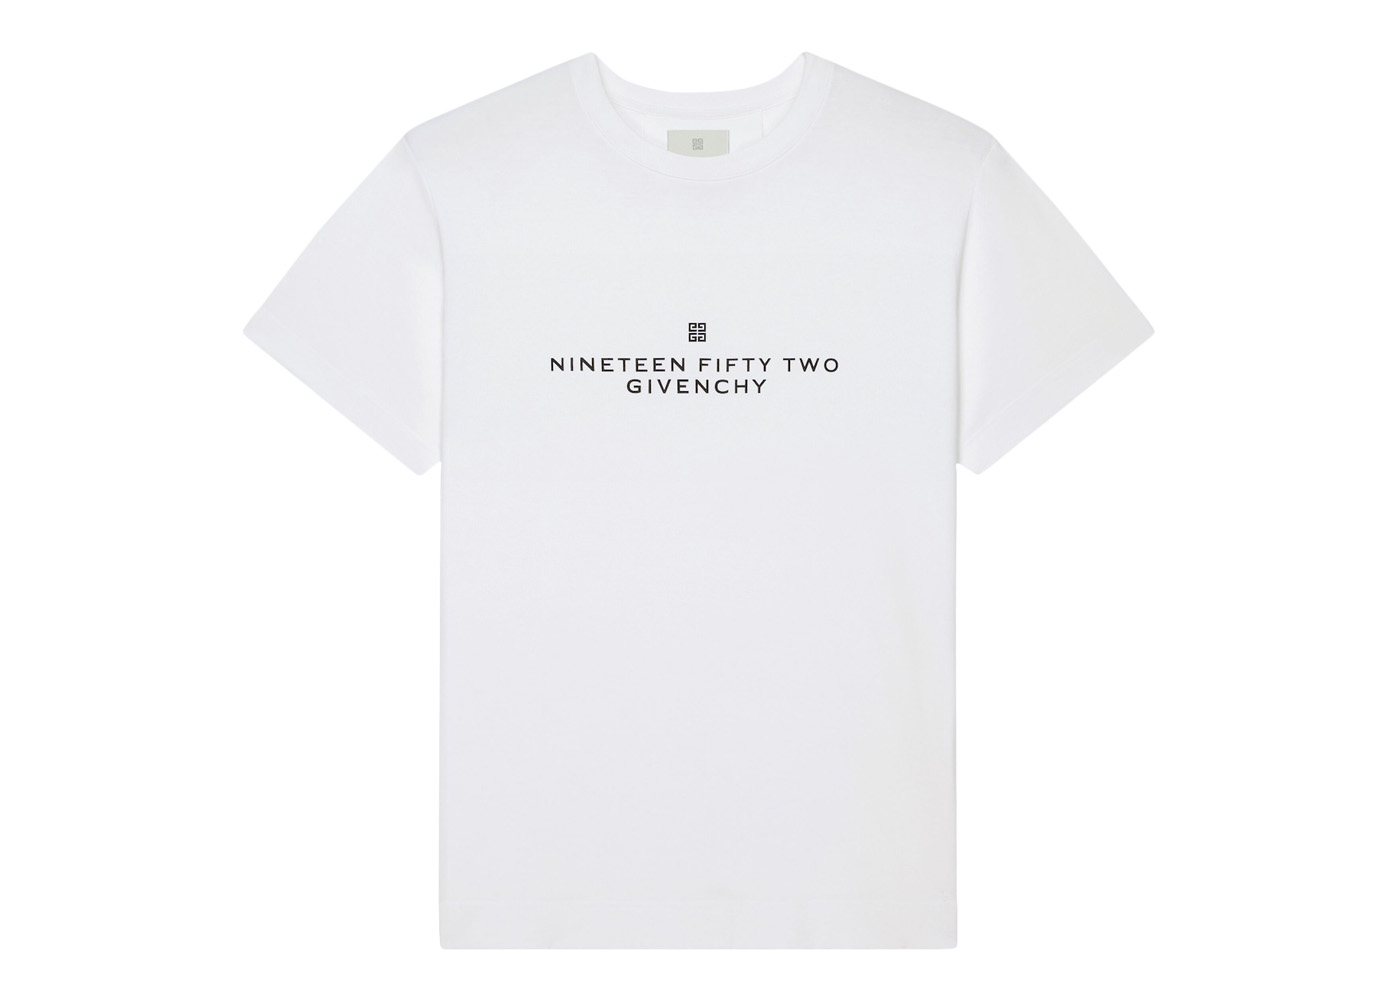 Givenchy Classic Fit In 1952 Printed T-Shirt White/Black Men's